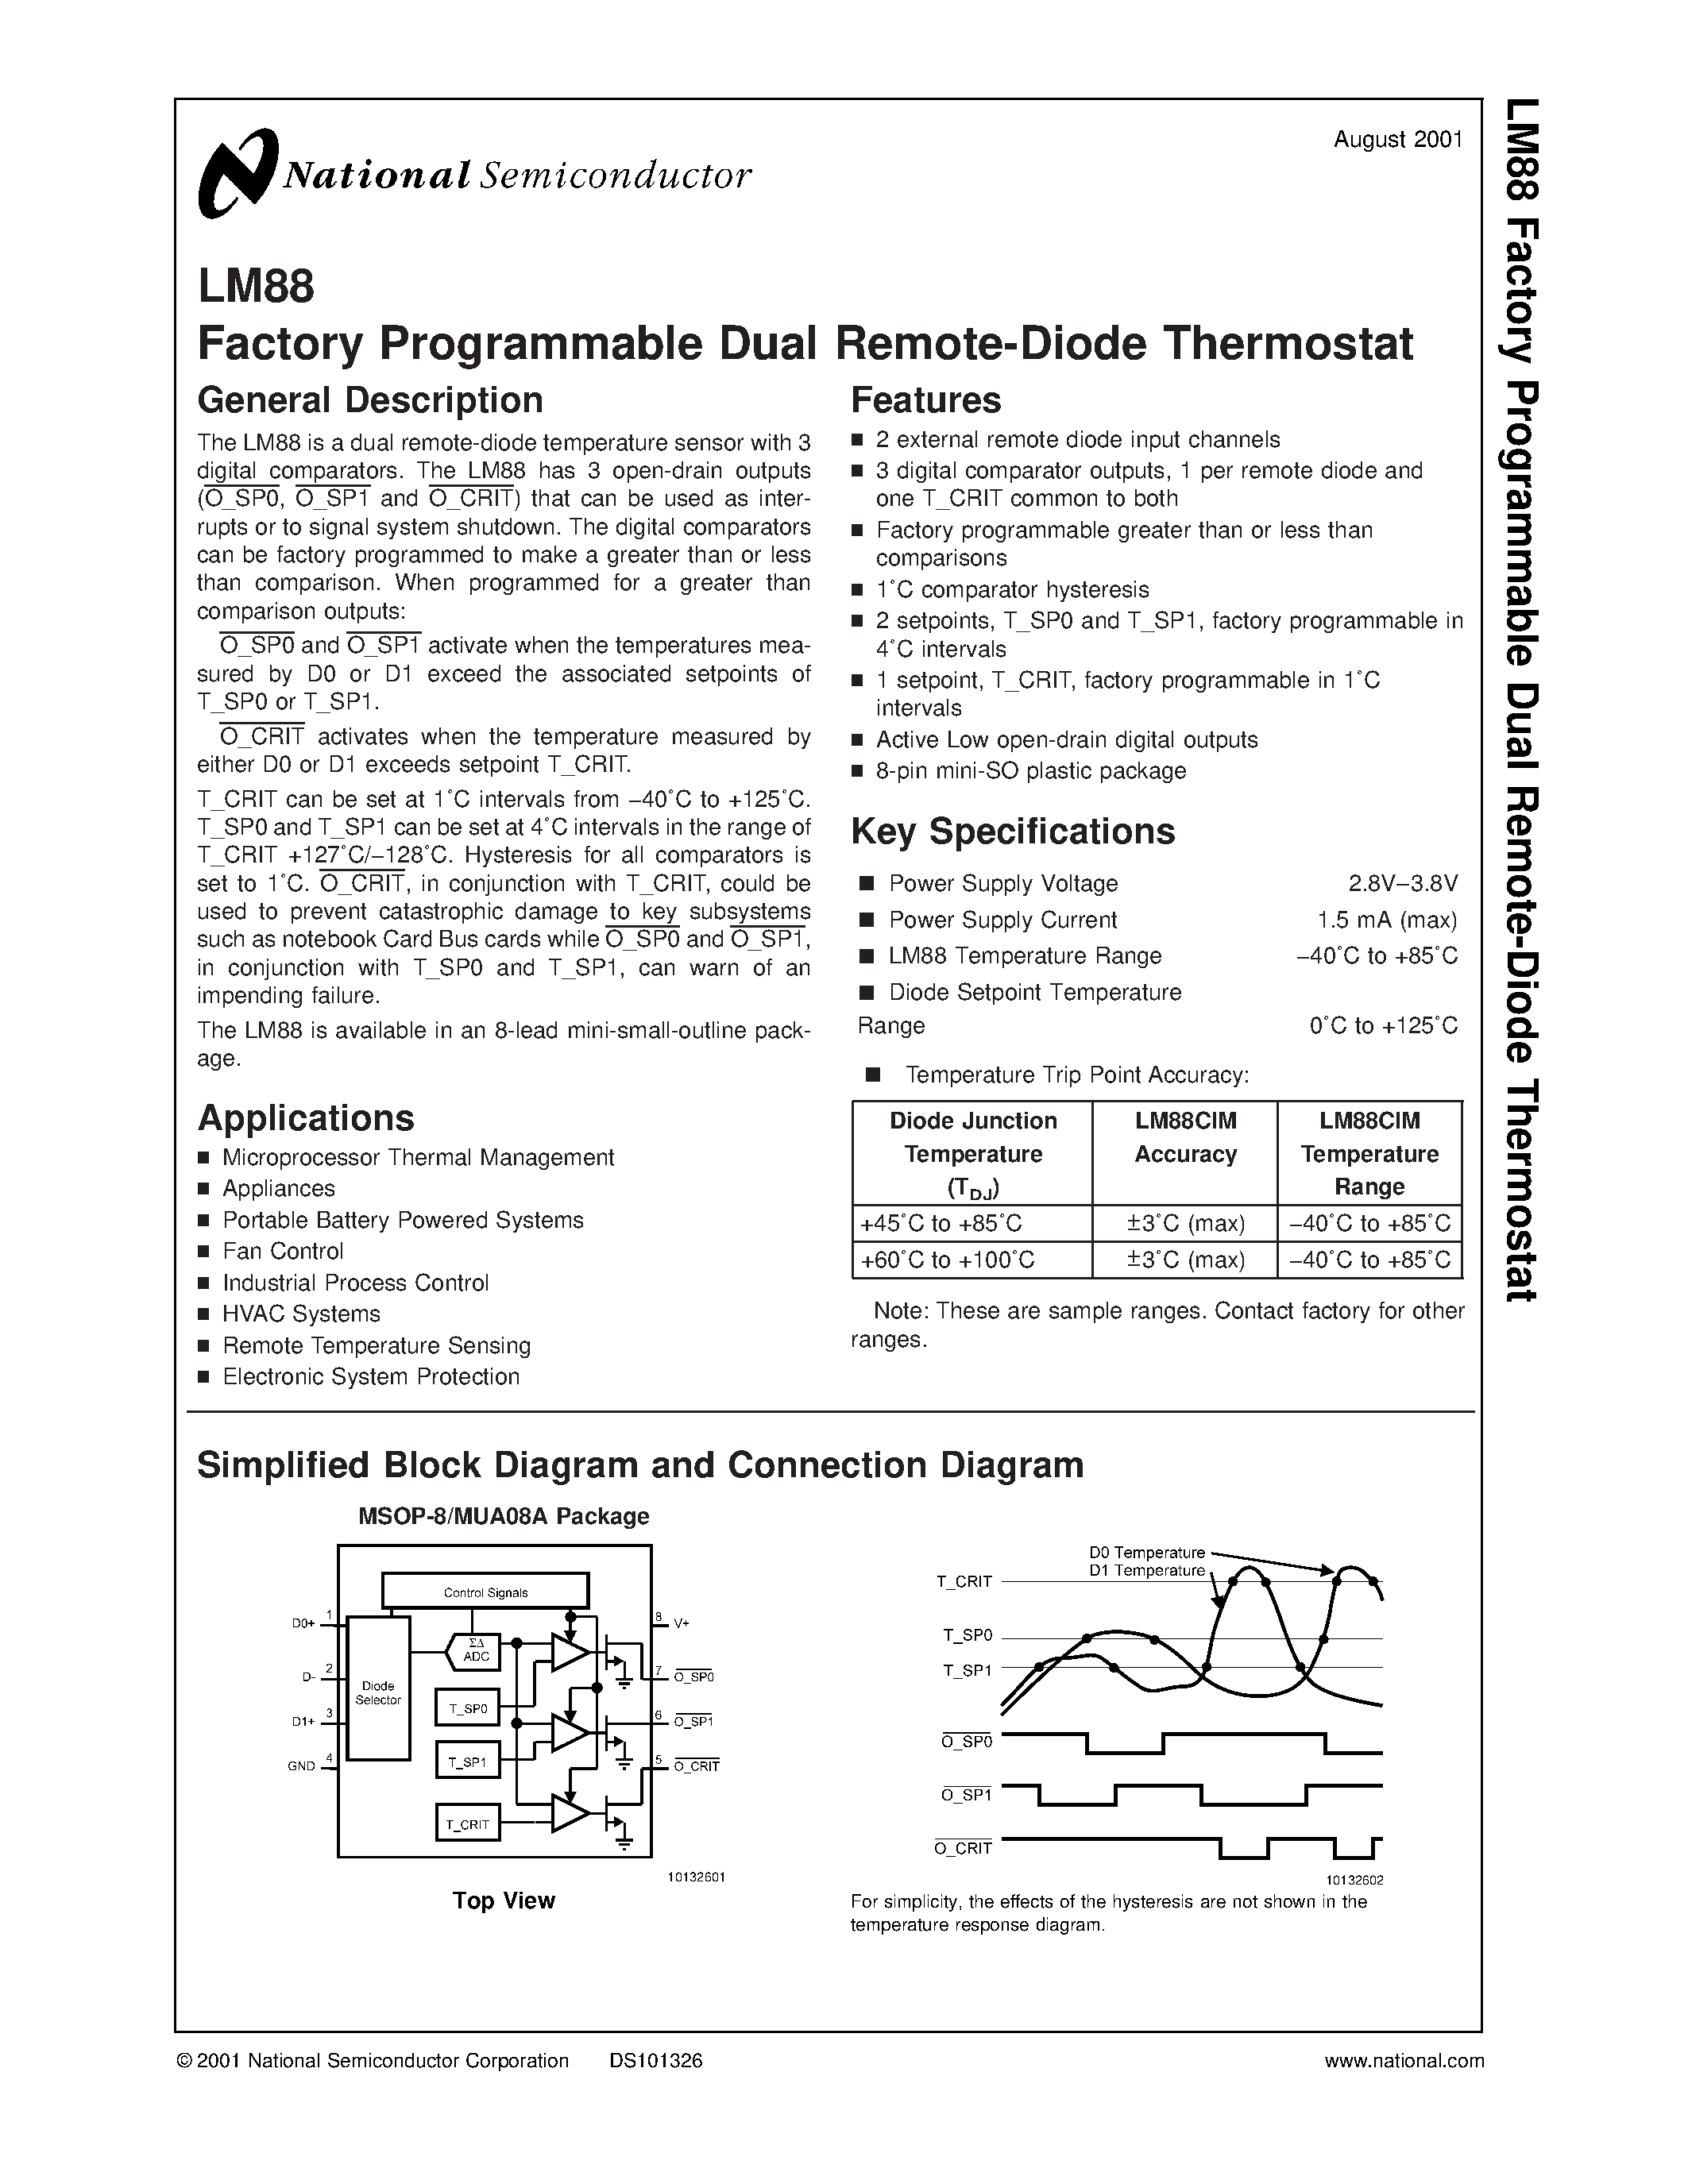 Datasheet LM88 - Factory Programmable Dual Remote-Diode Thermostat page 1